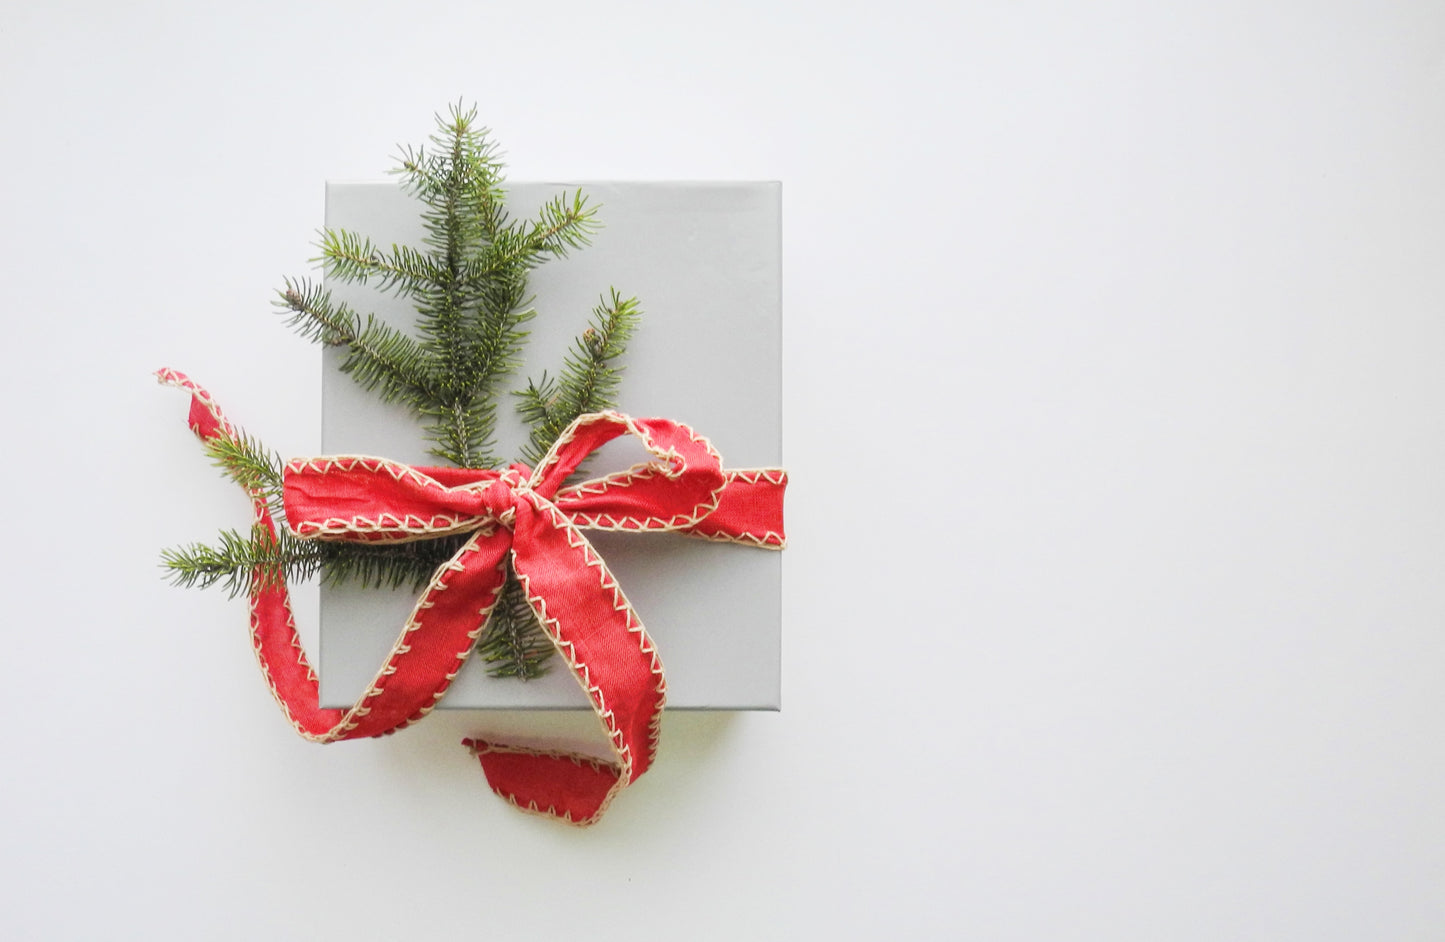 Meditation & Mindfulness: Your 2019 Holiday Gift Guide